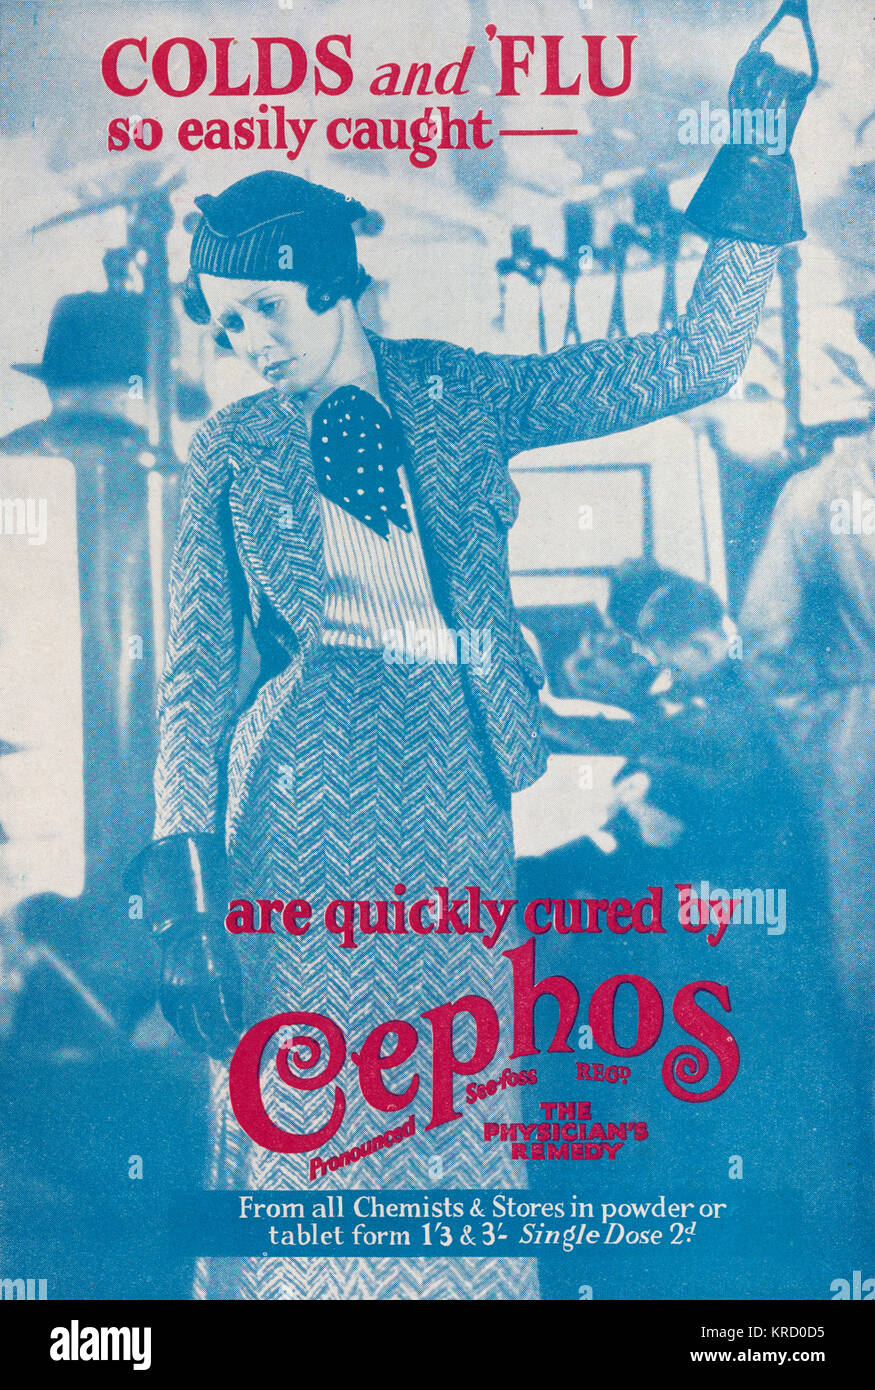 Advert for Cephos cold and flu powder depicting a poorly looking woman, dressed rather smartly, and standing, hanging onto a strap on a bus or tube train.  December 1938 Stock Photo